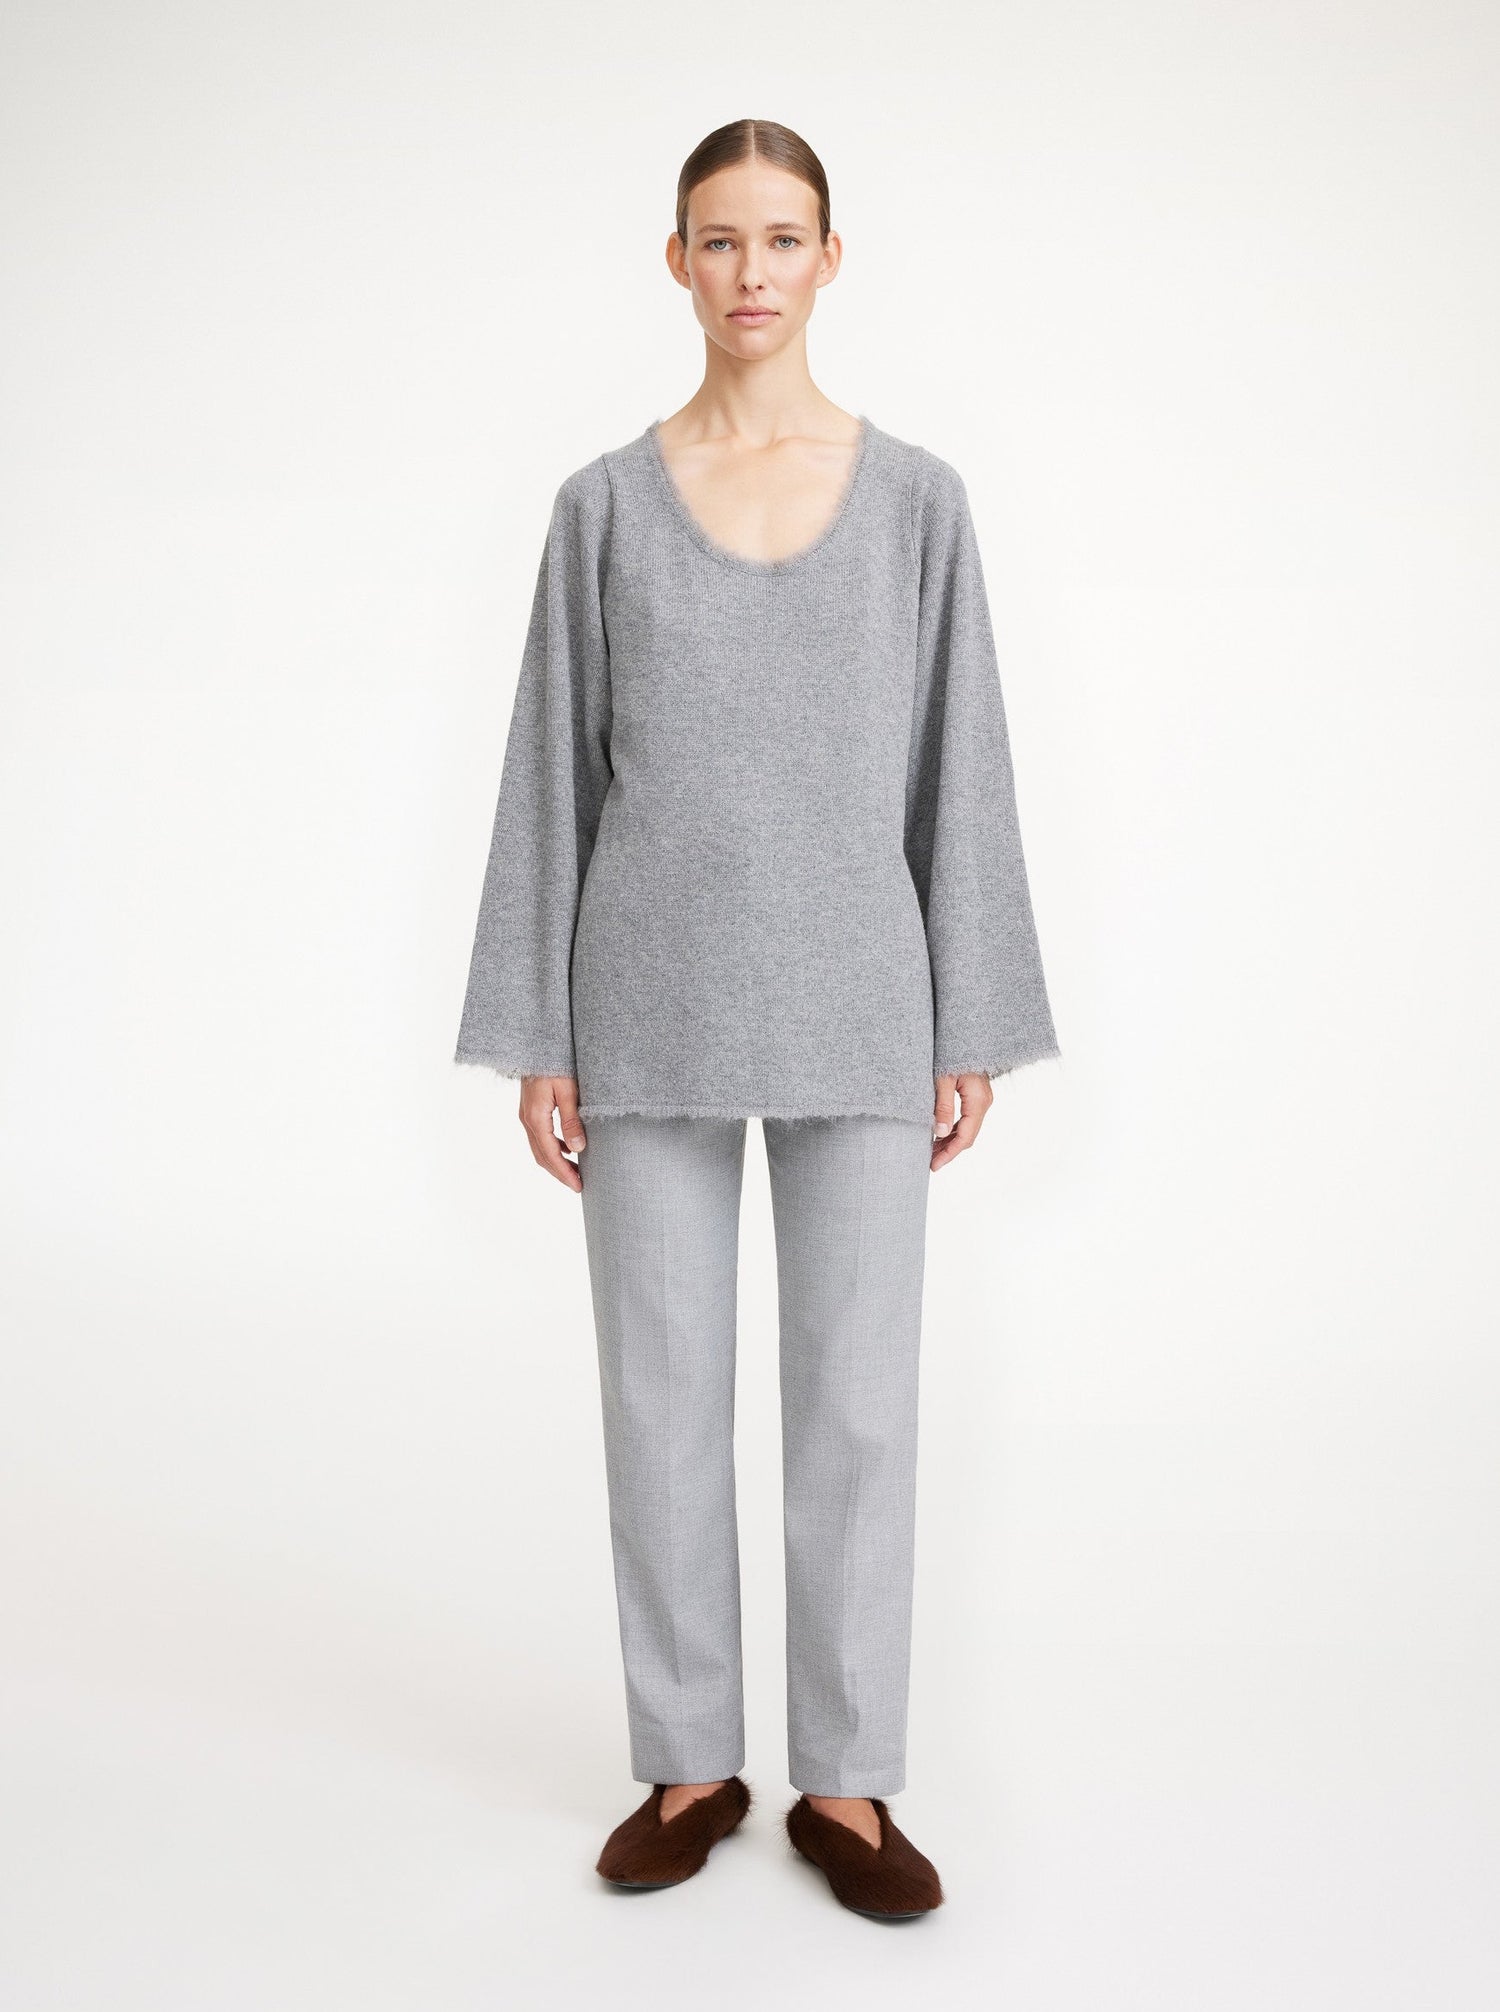 LUISE knitted sweater, grey